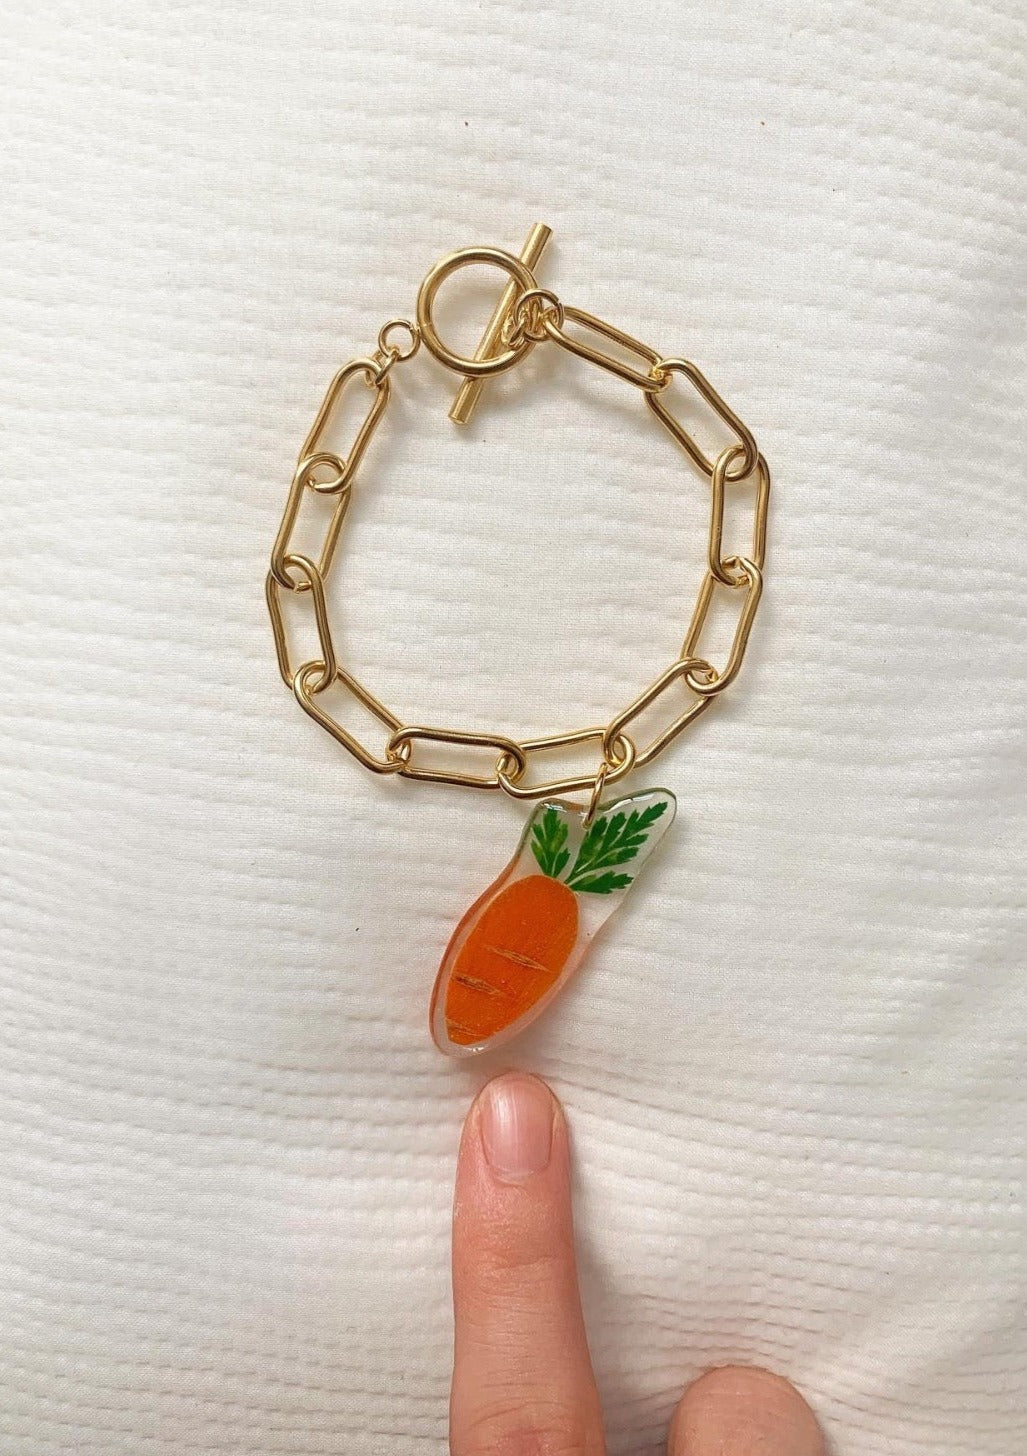 Tiny baby carrot slice suspended from a gold-plated stainless steel Albert chain.